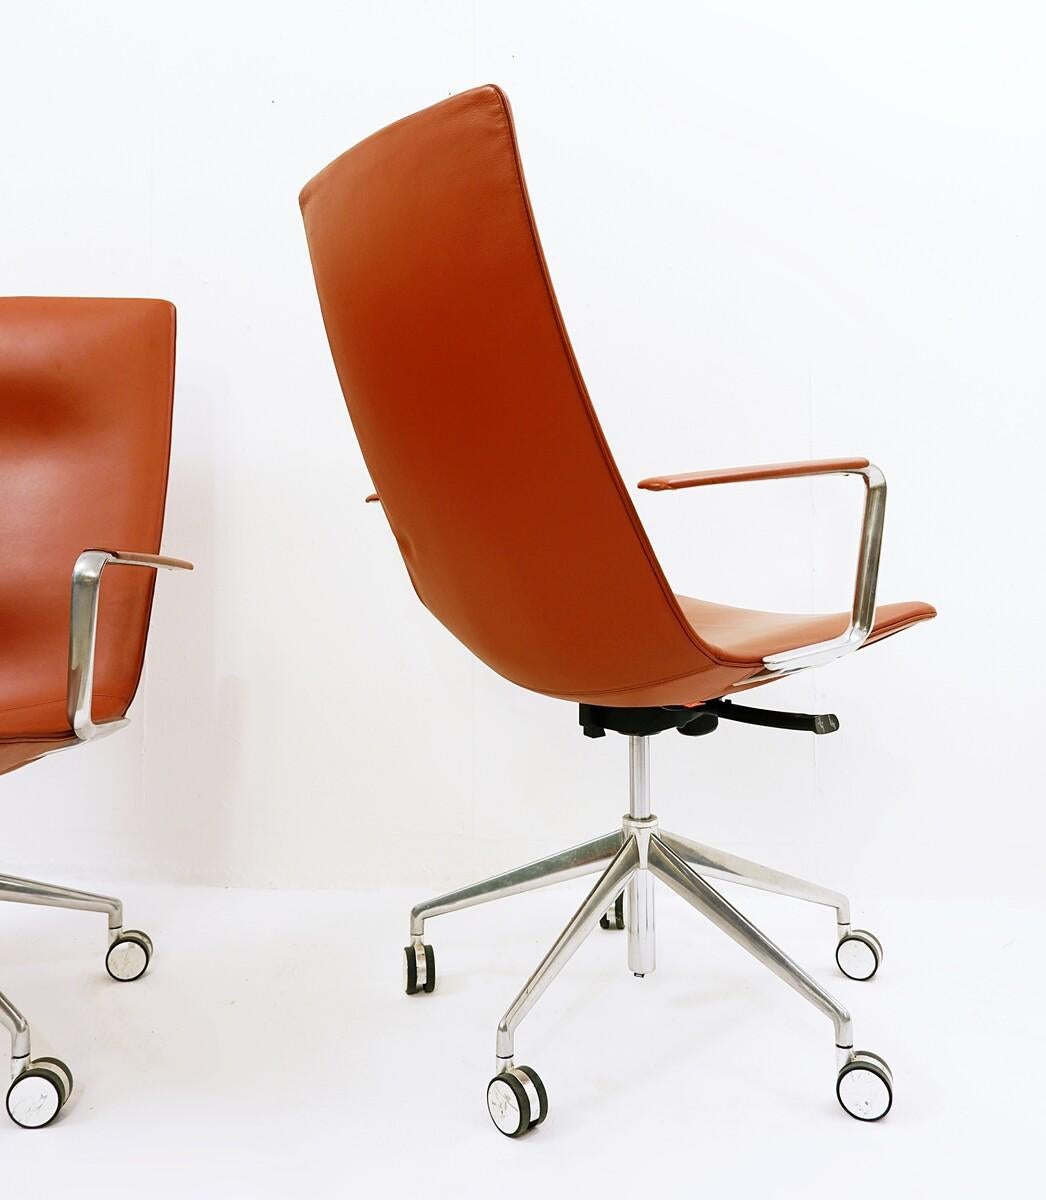 Office Chairs by Lievore, Altherr & Molina for Arper - 2 Available 2